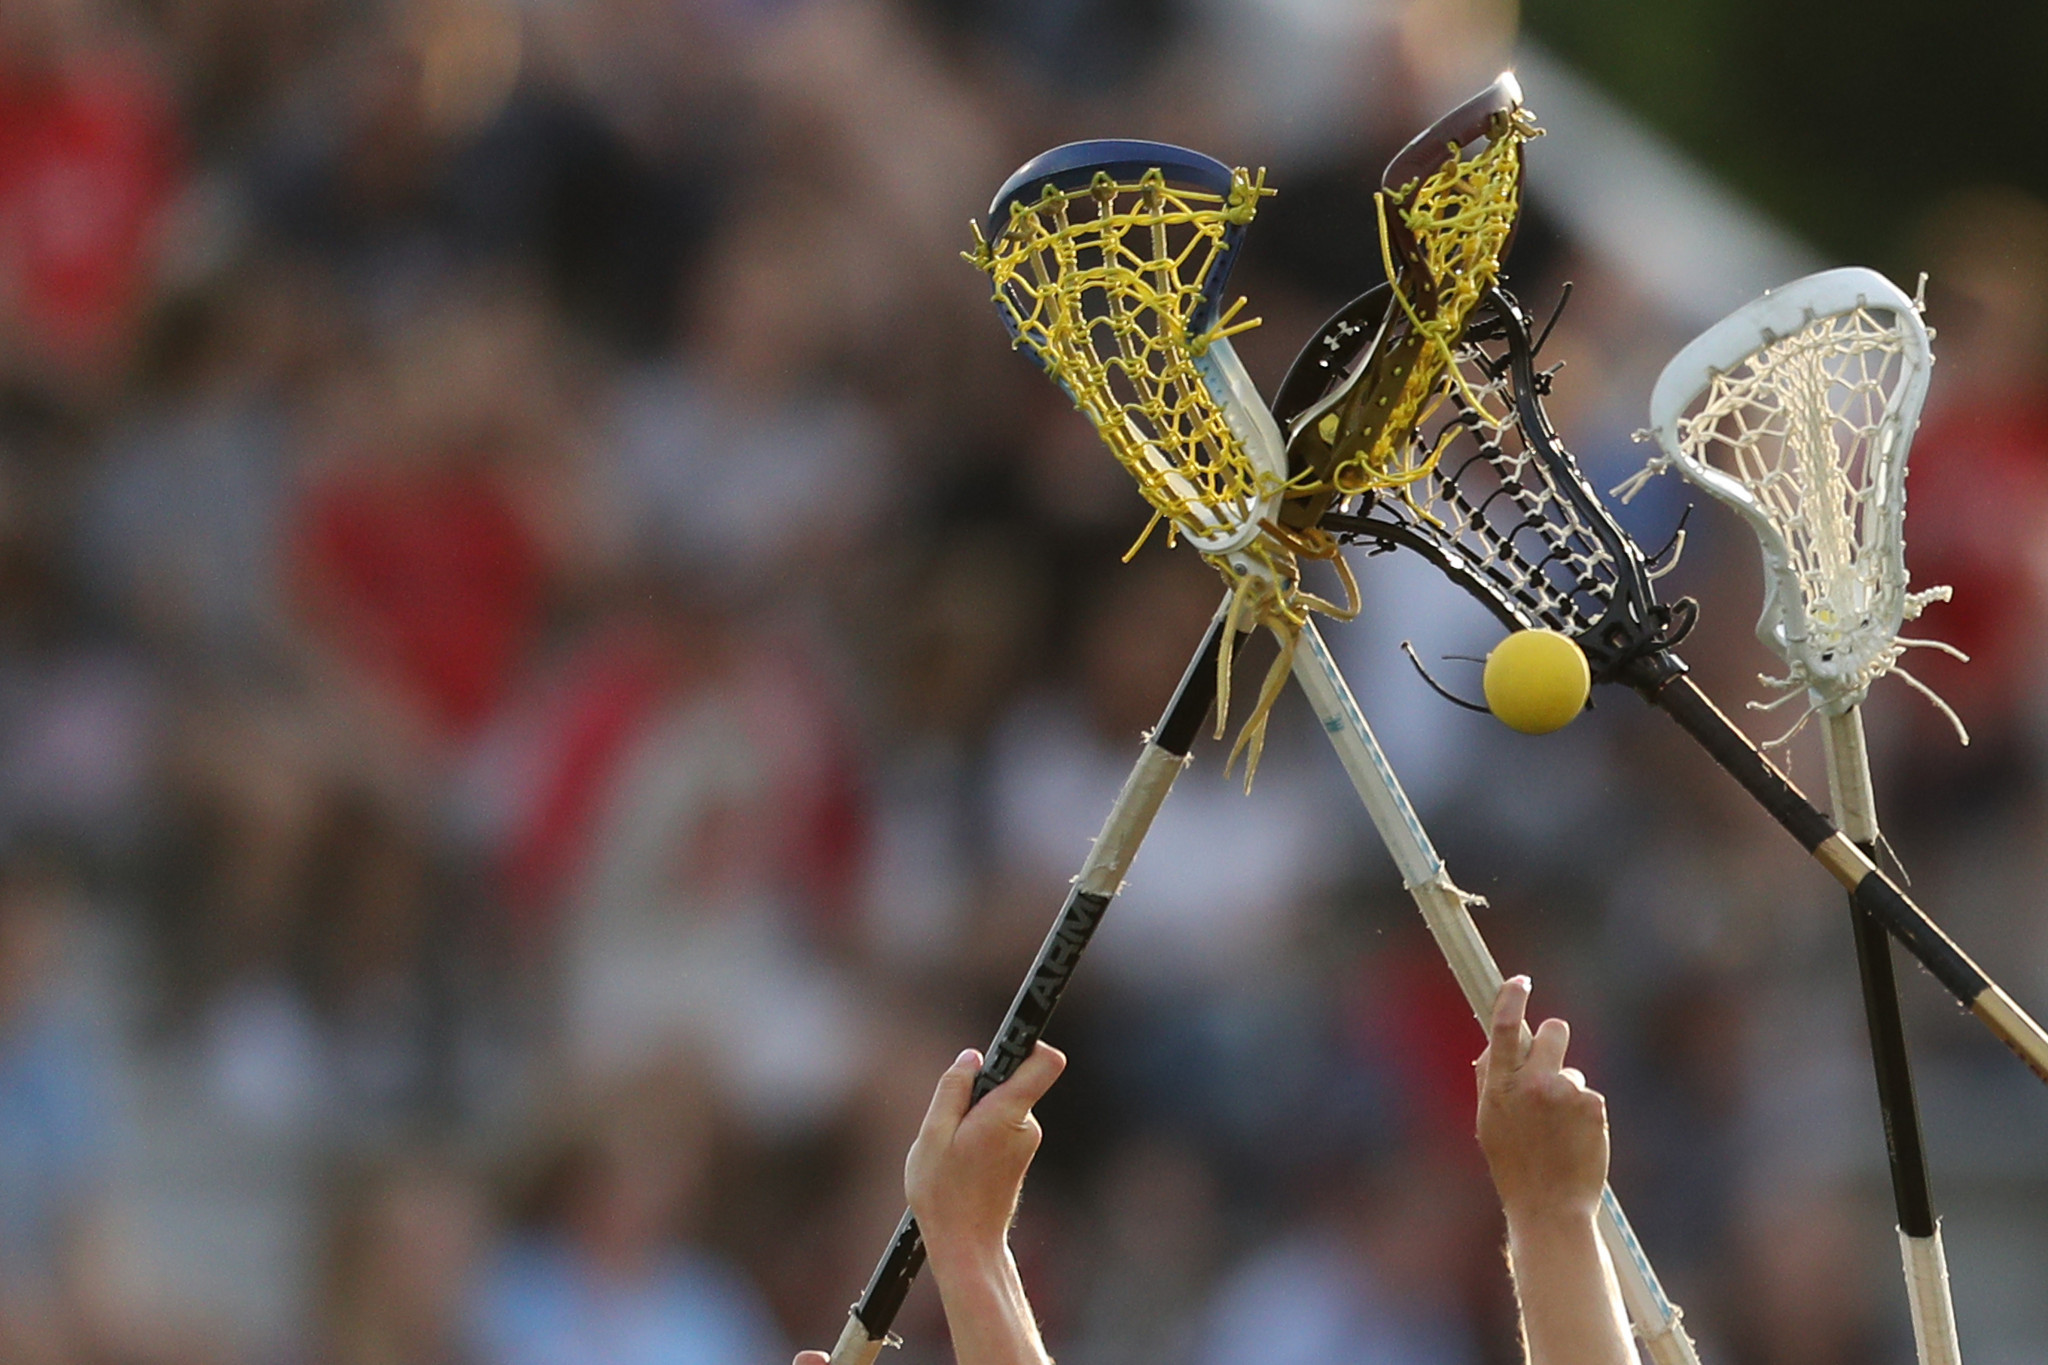 The United States will face Canada in a repeat of the 2018 final in the opening match of this year's World Lacrosse Men's Championship ©Getty Images